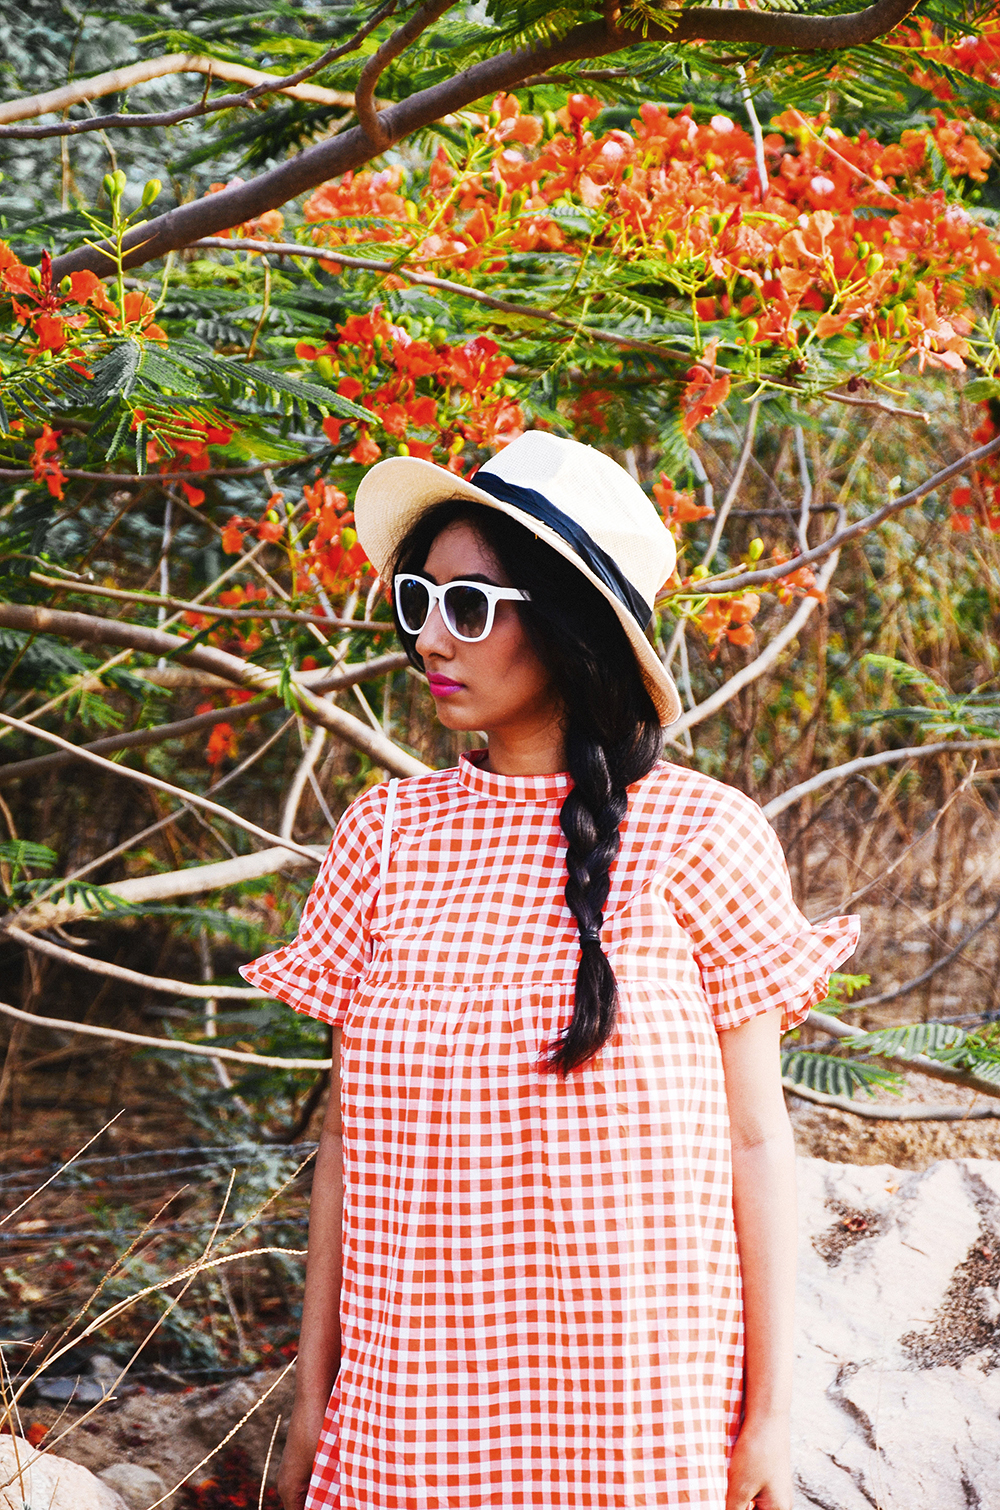 Lookbook ; Gingham ; Orange ; Outfit ; Hat ; White sunglasses ; Summer outfit ; fashion photography ; vintage ; Romwe ; braids ; summer blooms ; woods ; editorial ; strong ; Dark ; summer fashion ; spring ; summer 17 ; Naznin ; Naznin Suhaer ; dusky ; white sling ; indian blogger ; hyderabad fashion bloggers ; hyderabad bloggers ; hyderabad fashion blogger ; I Dress for the Applause ; 